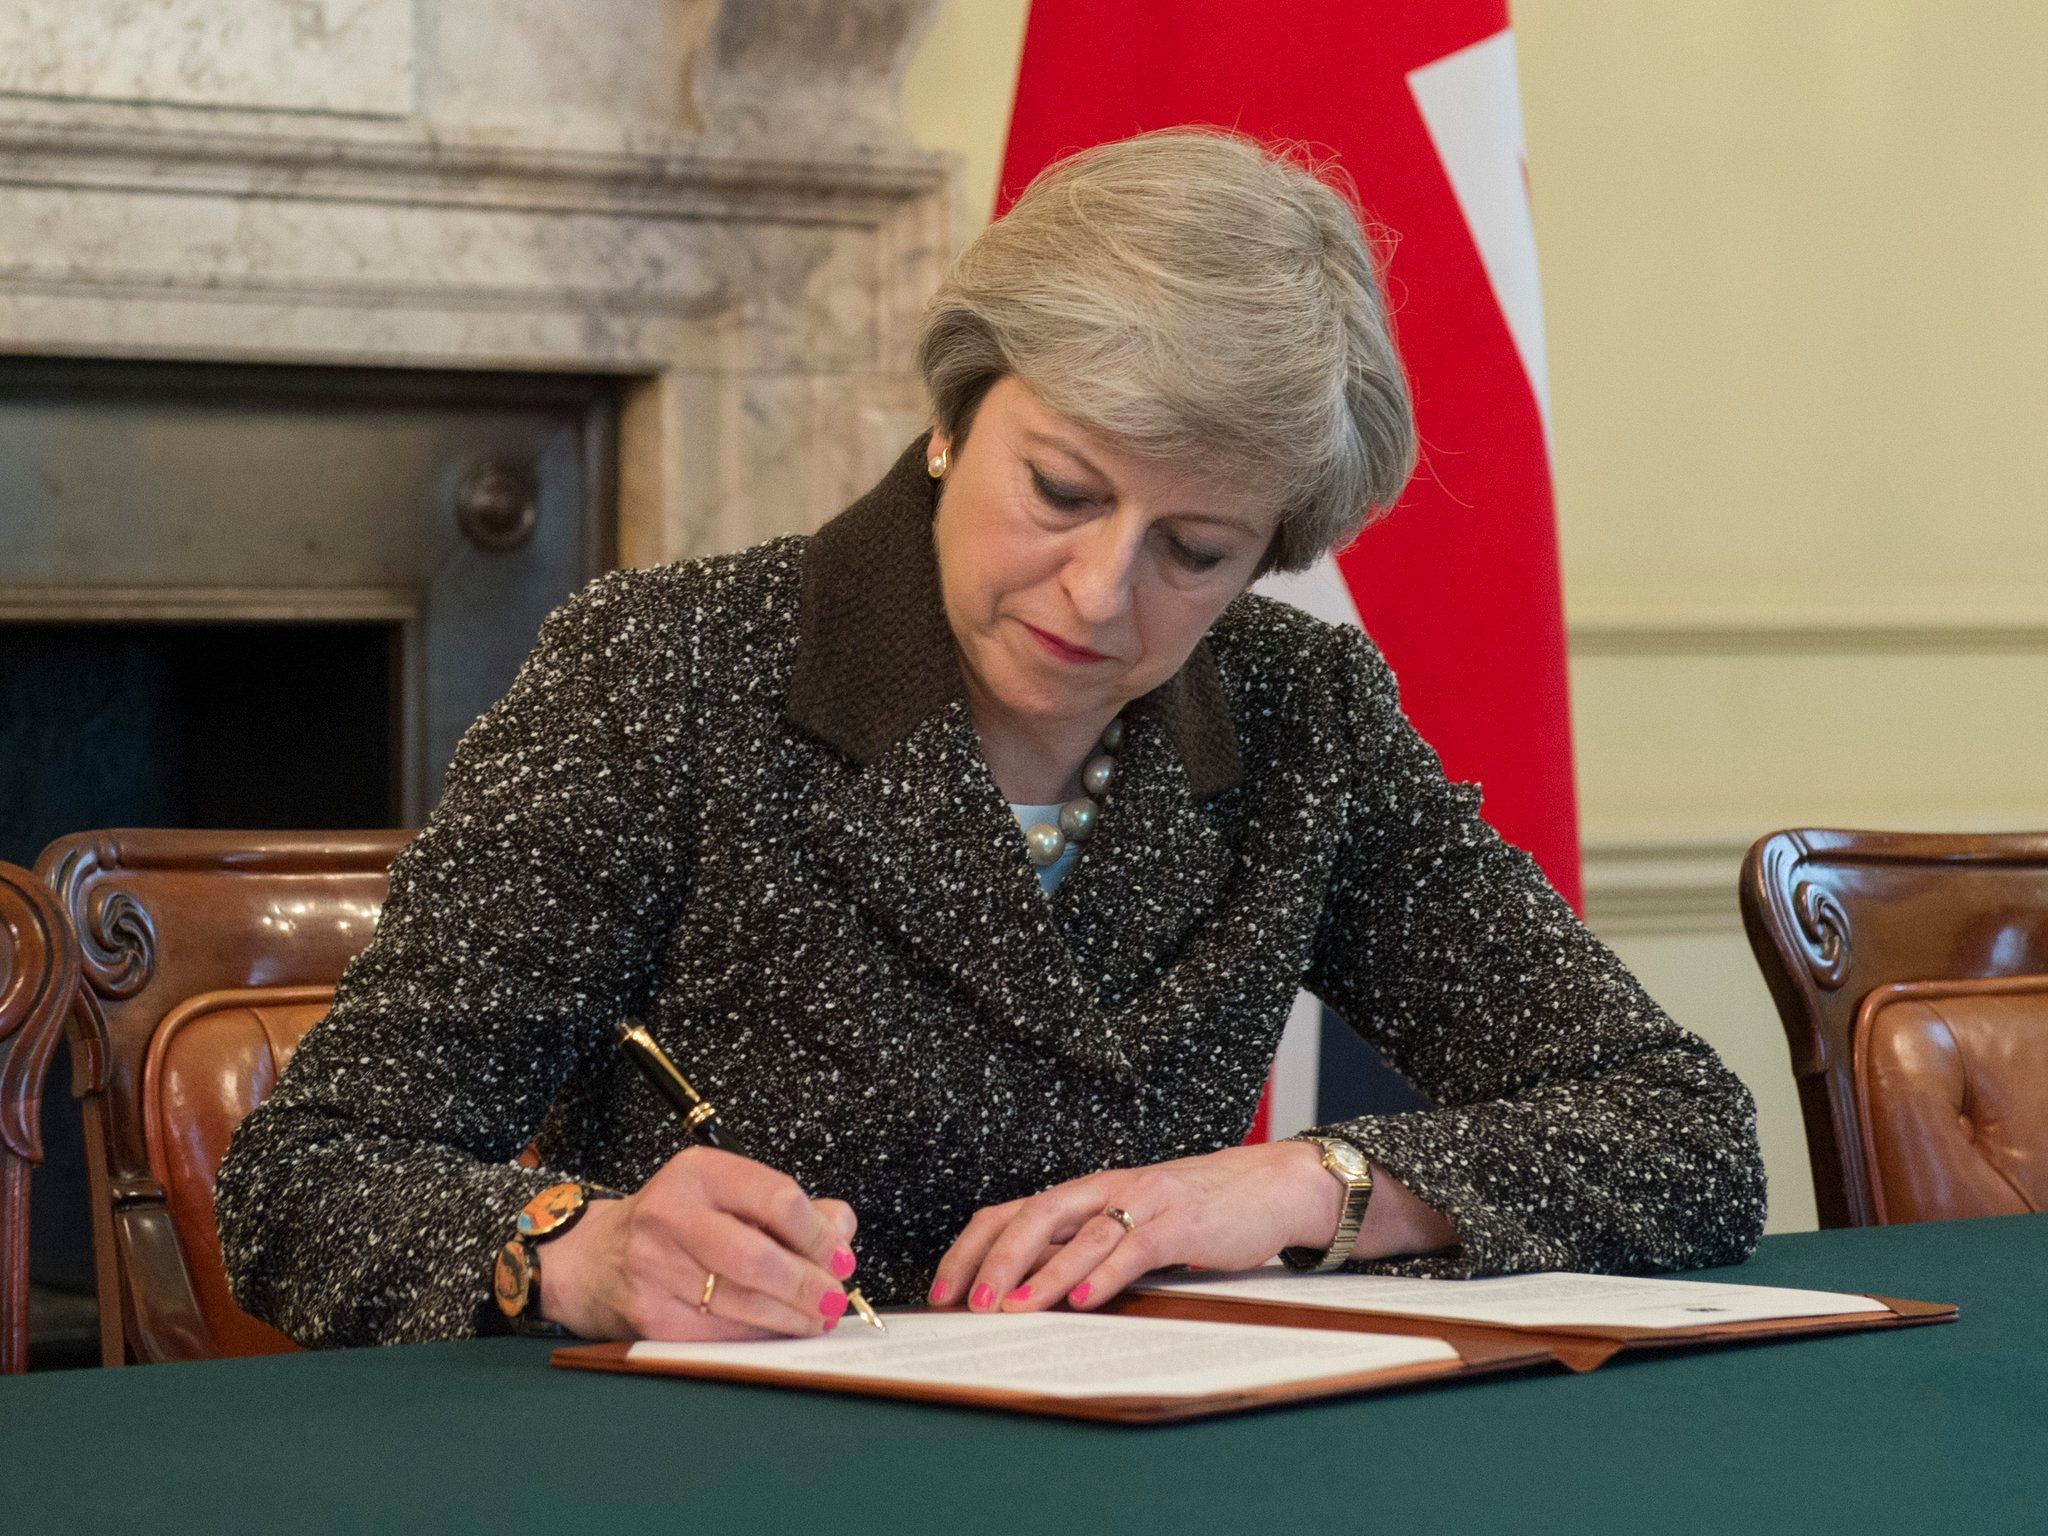 British PM signs letter for Brexit with calls for UK unity